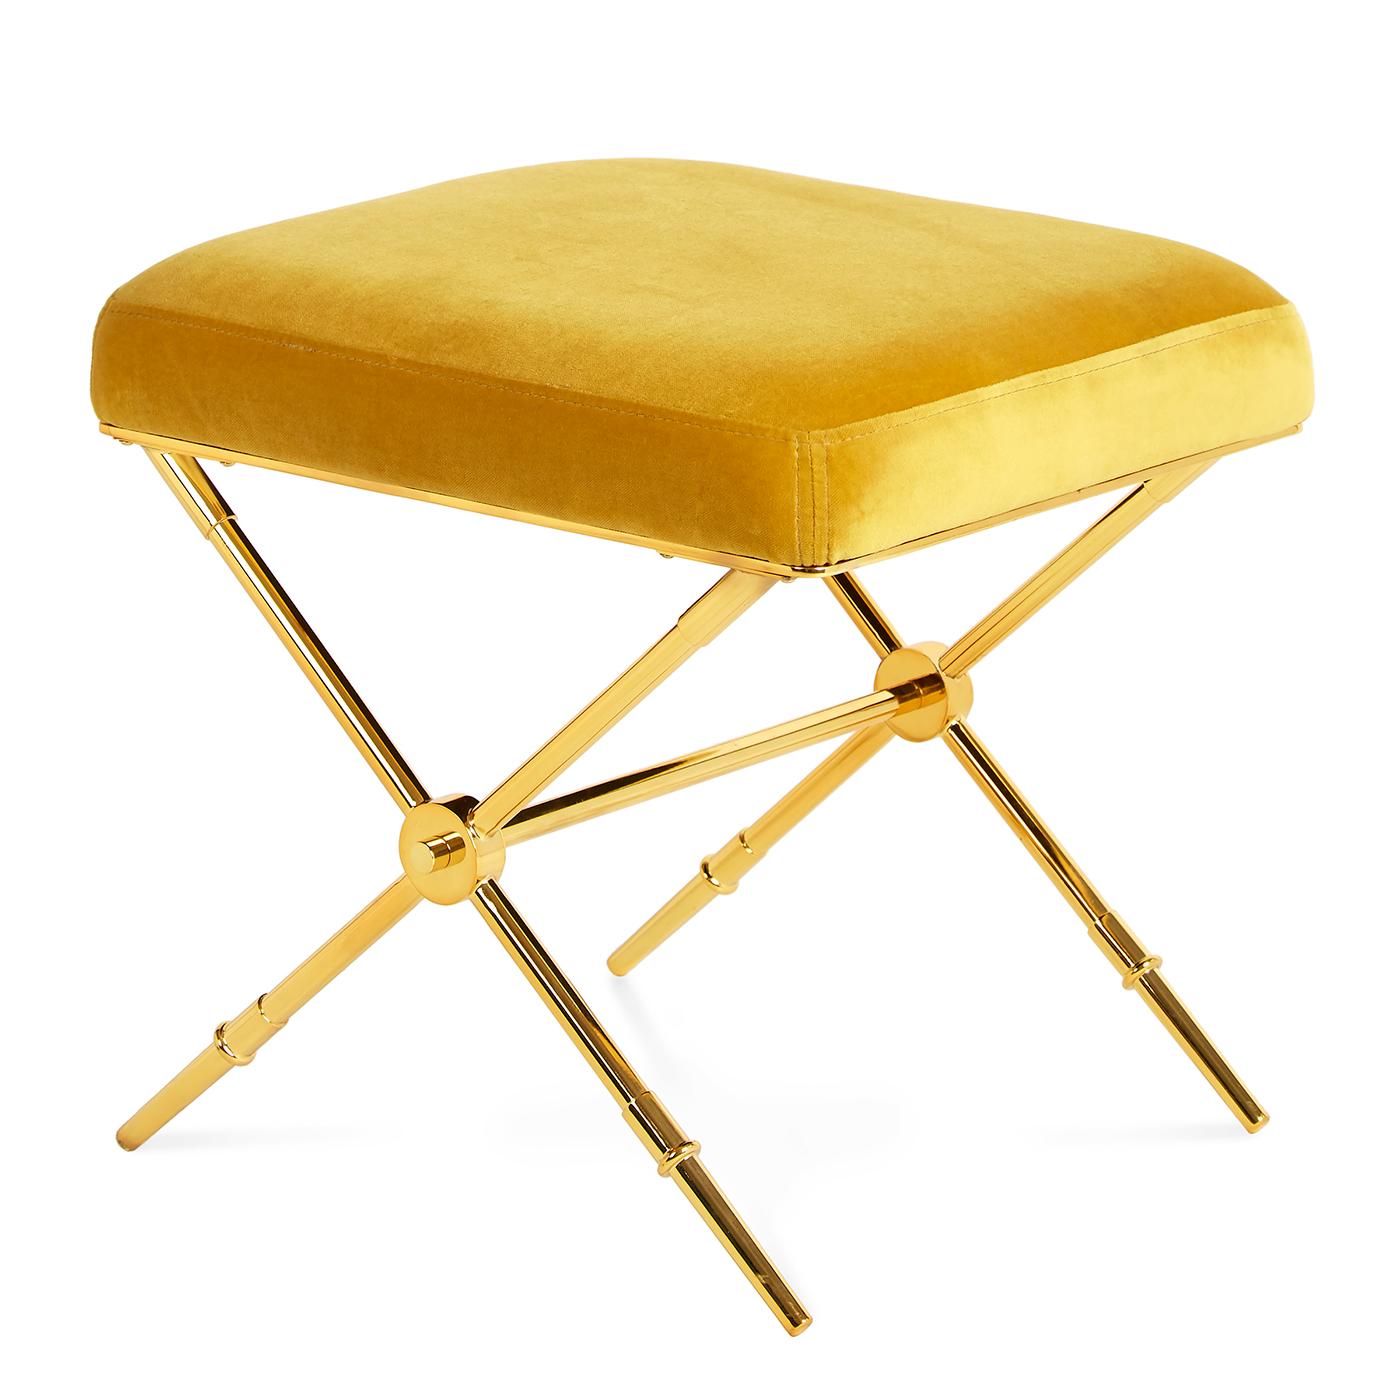 Golden glow. Our updated take on Empire style, the Rider Bench doubles as a tiny table when topped with a tray. An embroidered plush velvet seat on sabot-detailed legs. Gleaming brass with golden velvet upholstery—luxe and surreal all at once. Fab